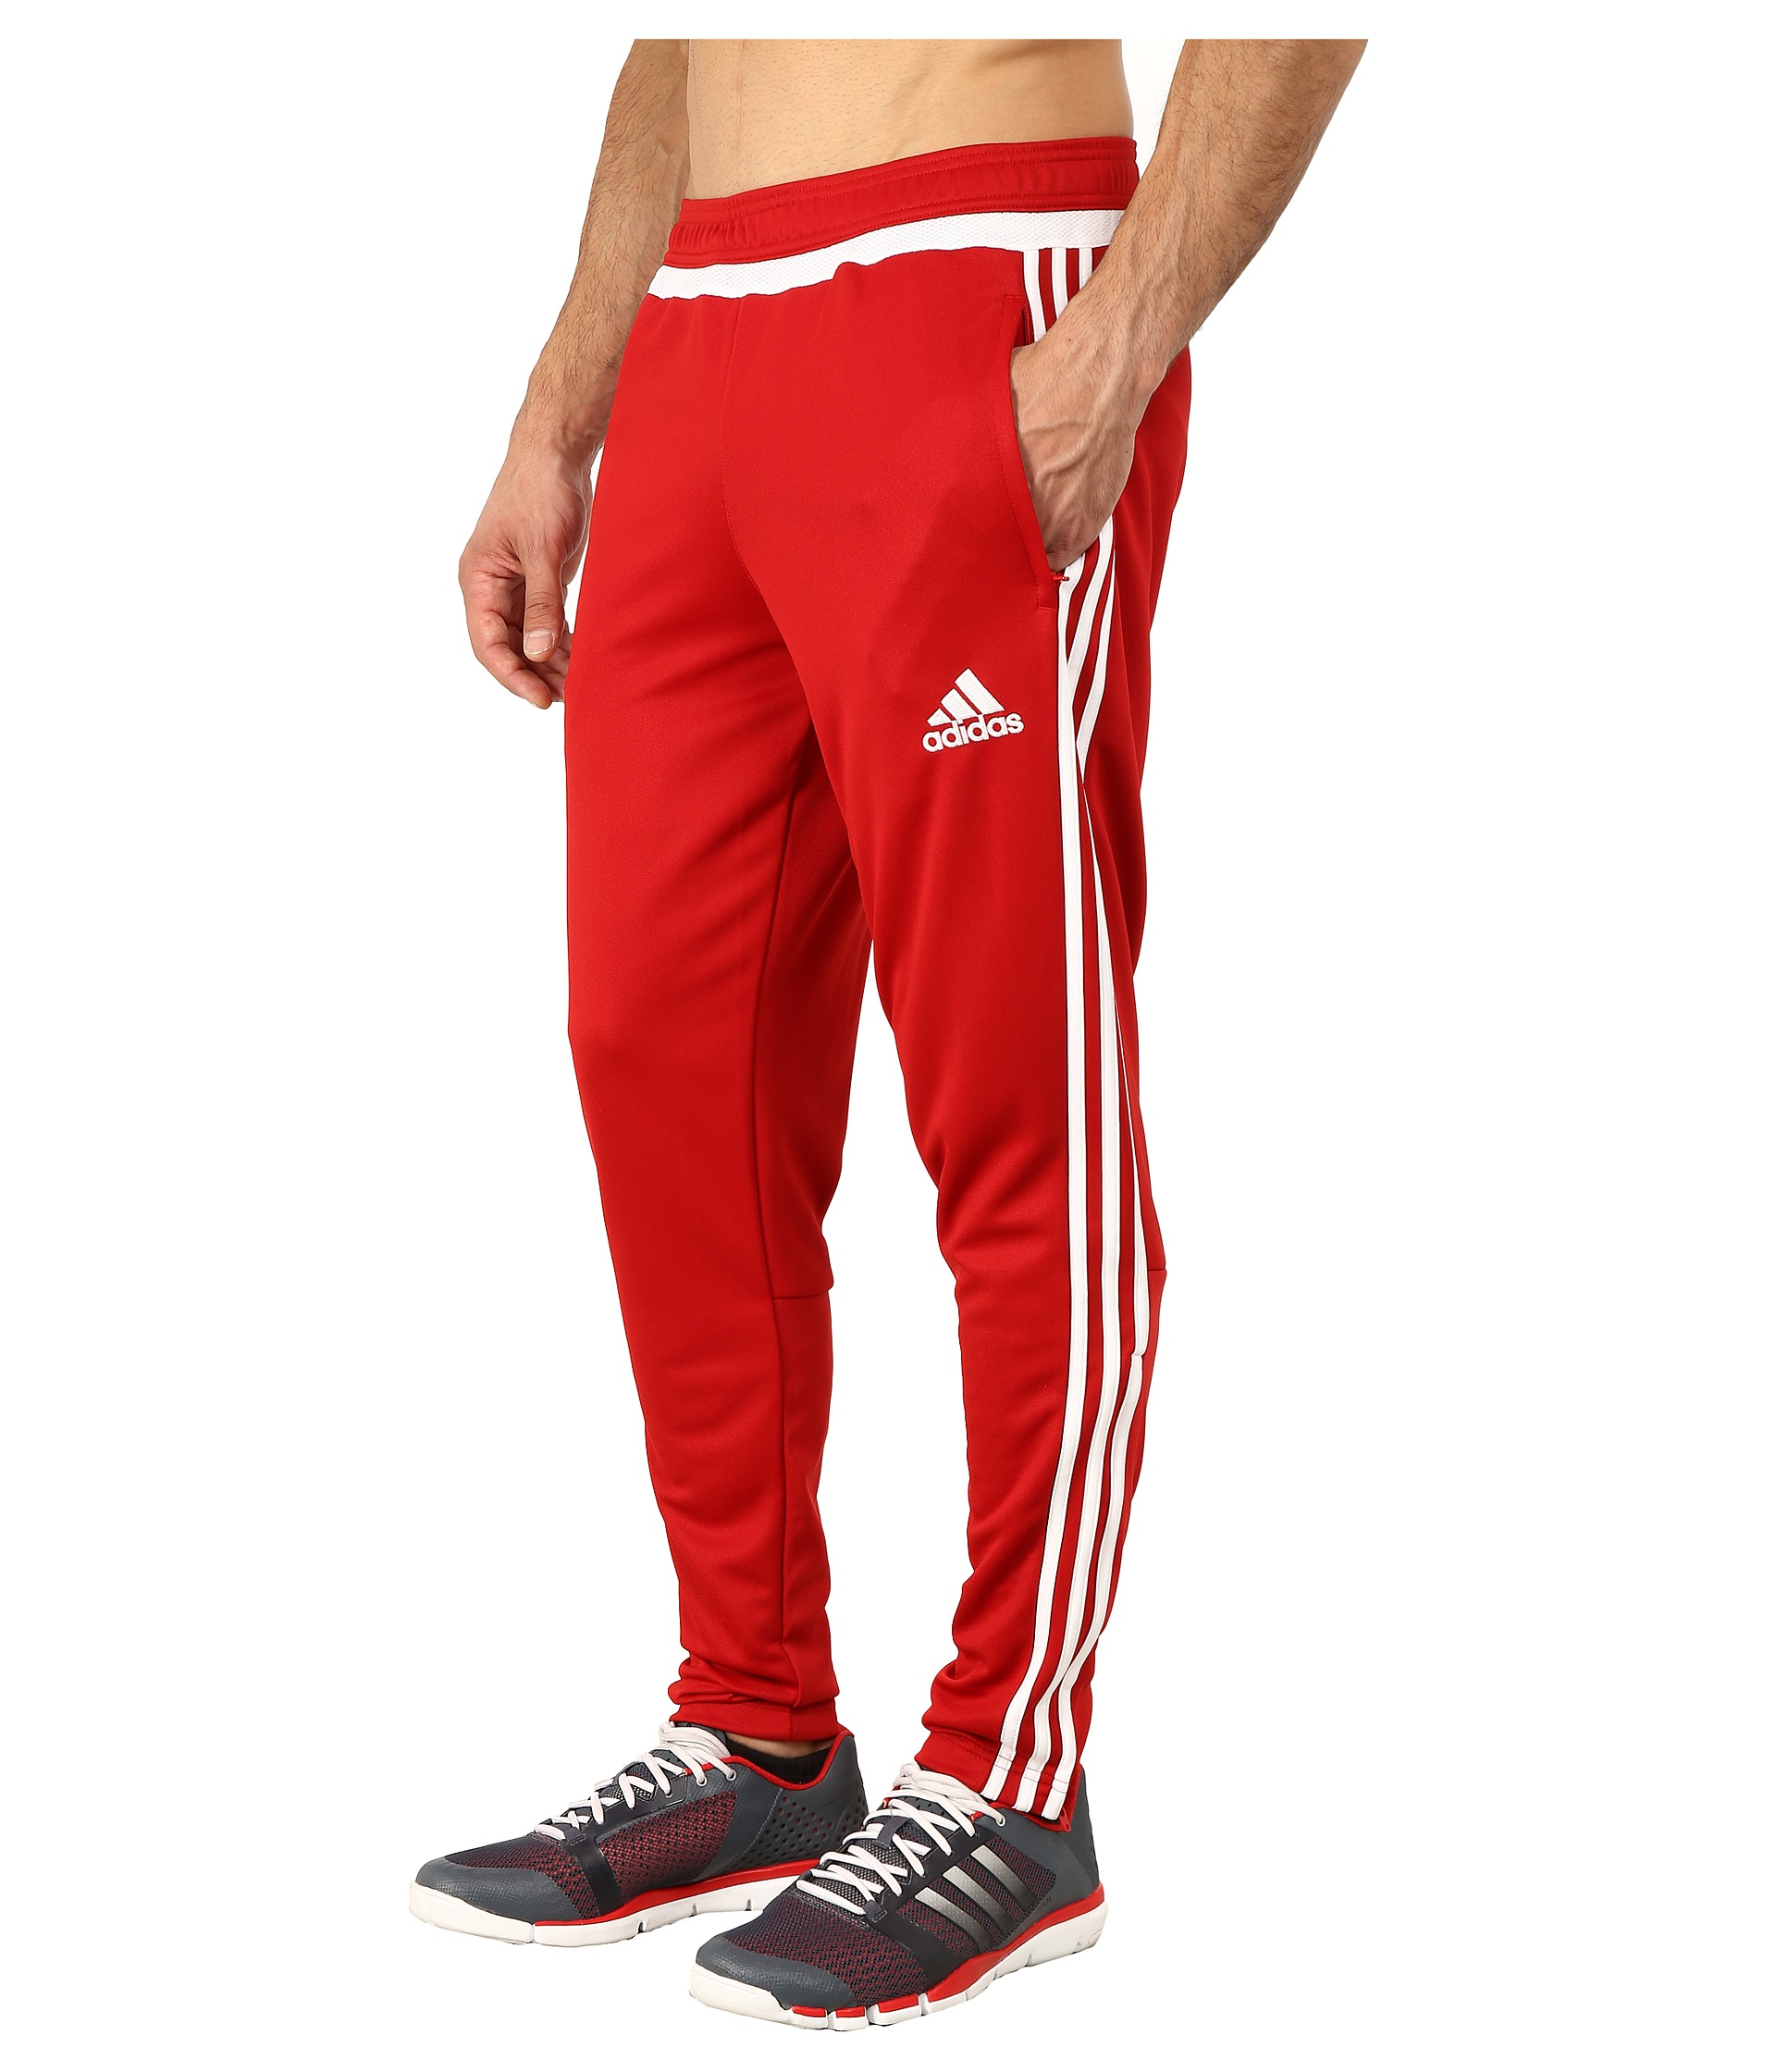 adidas climacool red pants